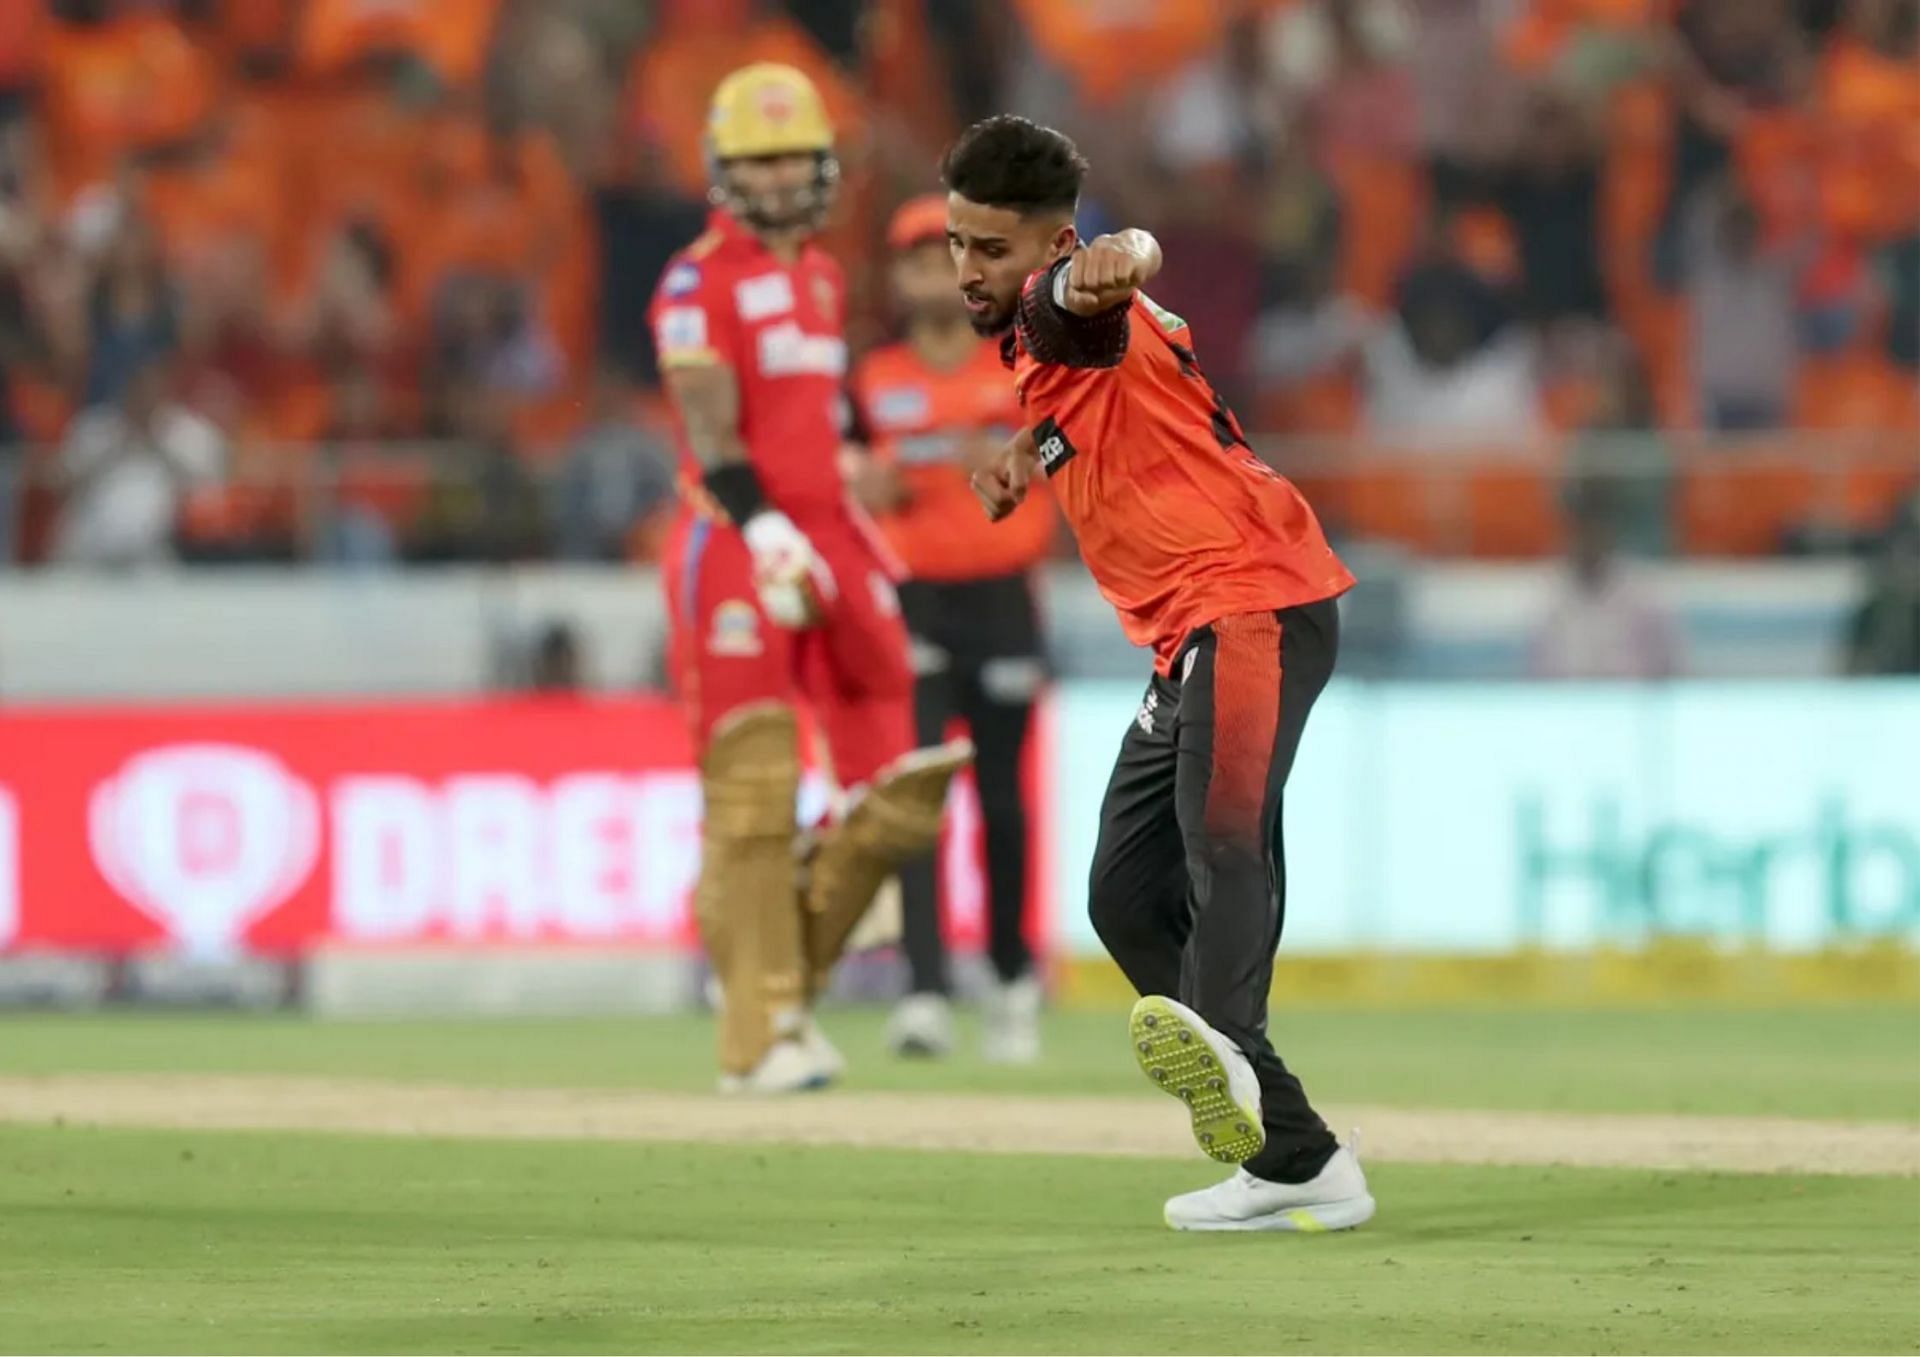 Will Umran Malik start for SRH against CSK? (Picture Credits: BCCI).